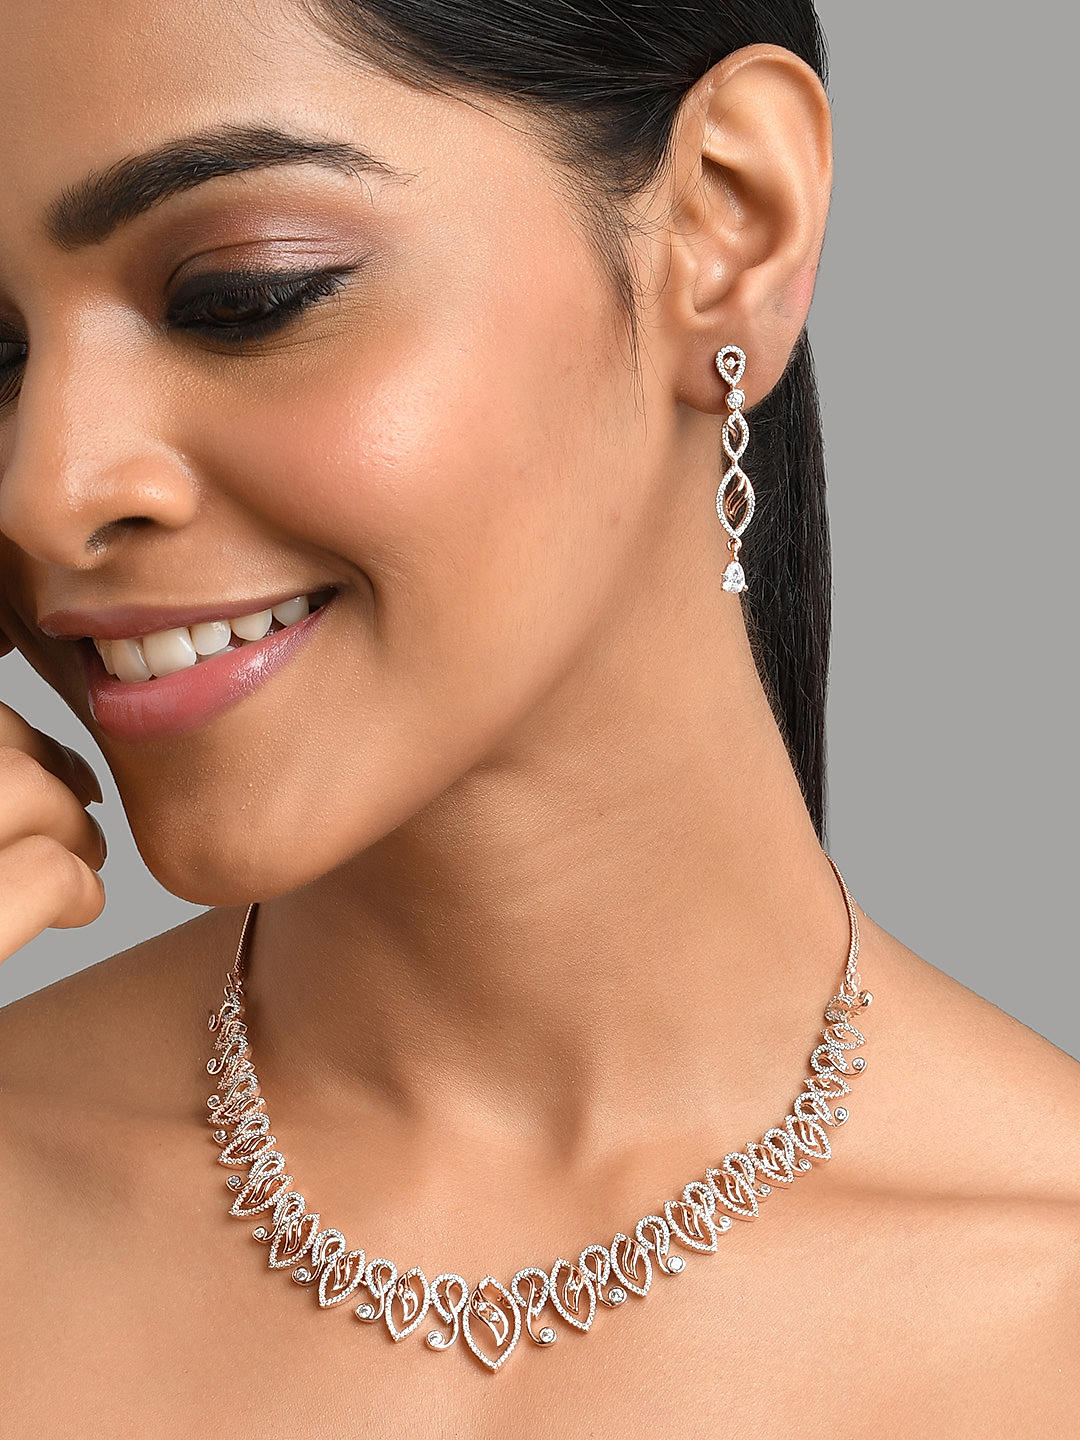 Buy Stunning Necklace and Earrings Set in 14KT Rose Gold Online | ORRA